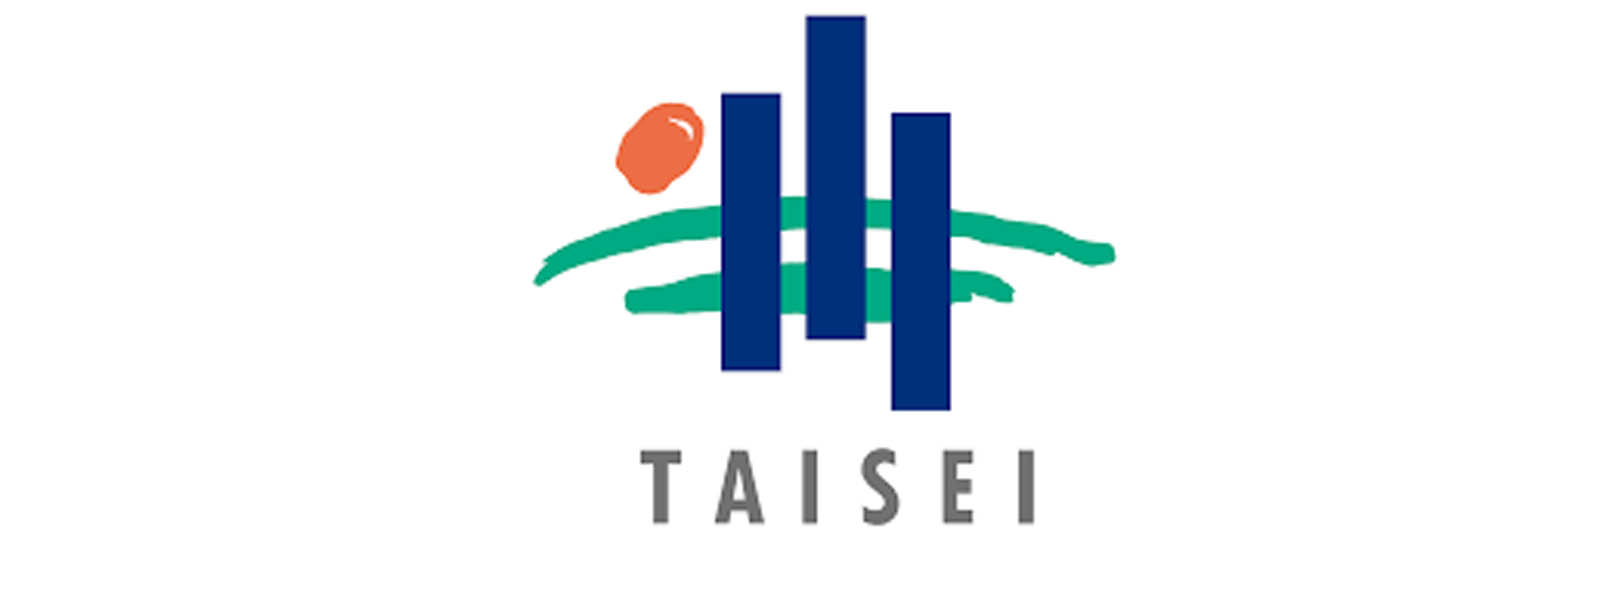 Taisei Corp. indicted by Japan for bid-rigging 